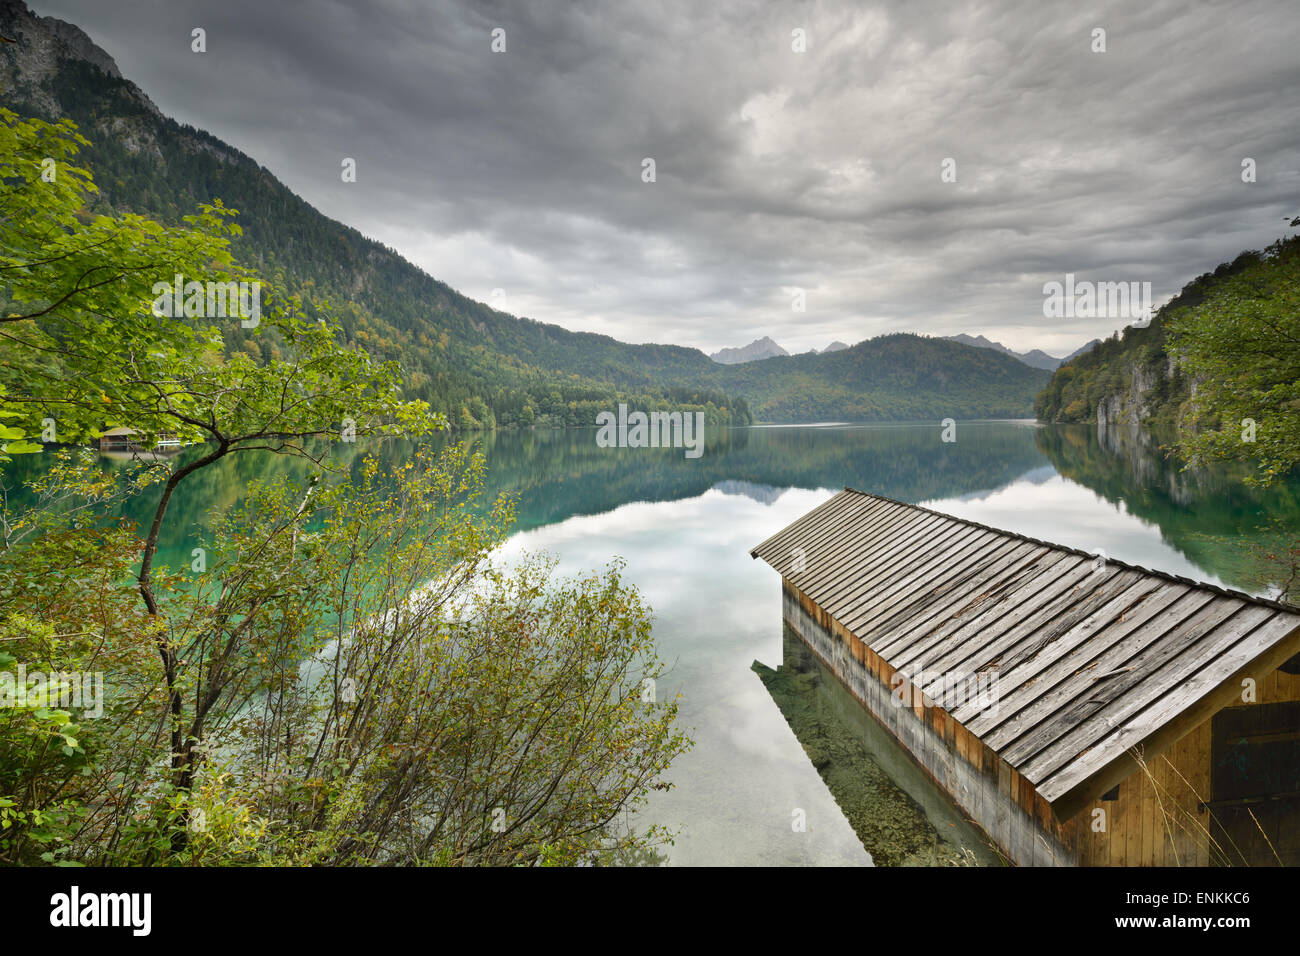 Lake Alpsee in the Bavarian Alps of Germany. Stock Photo